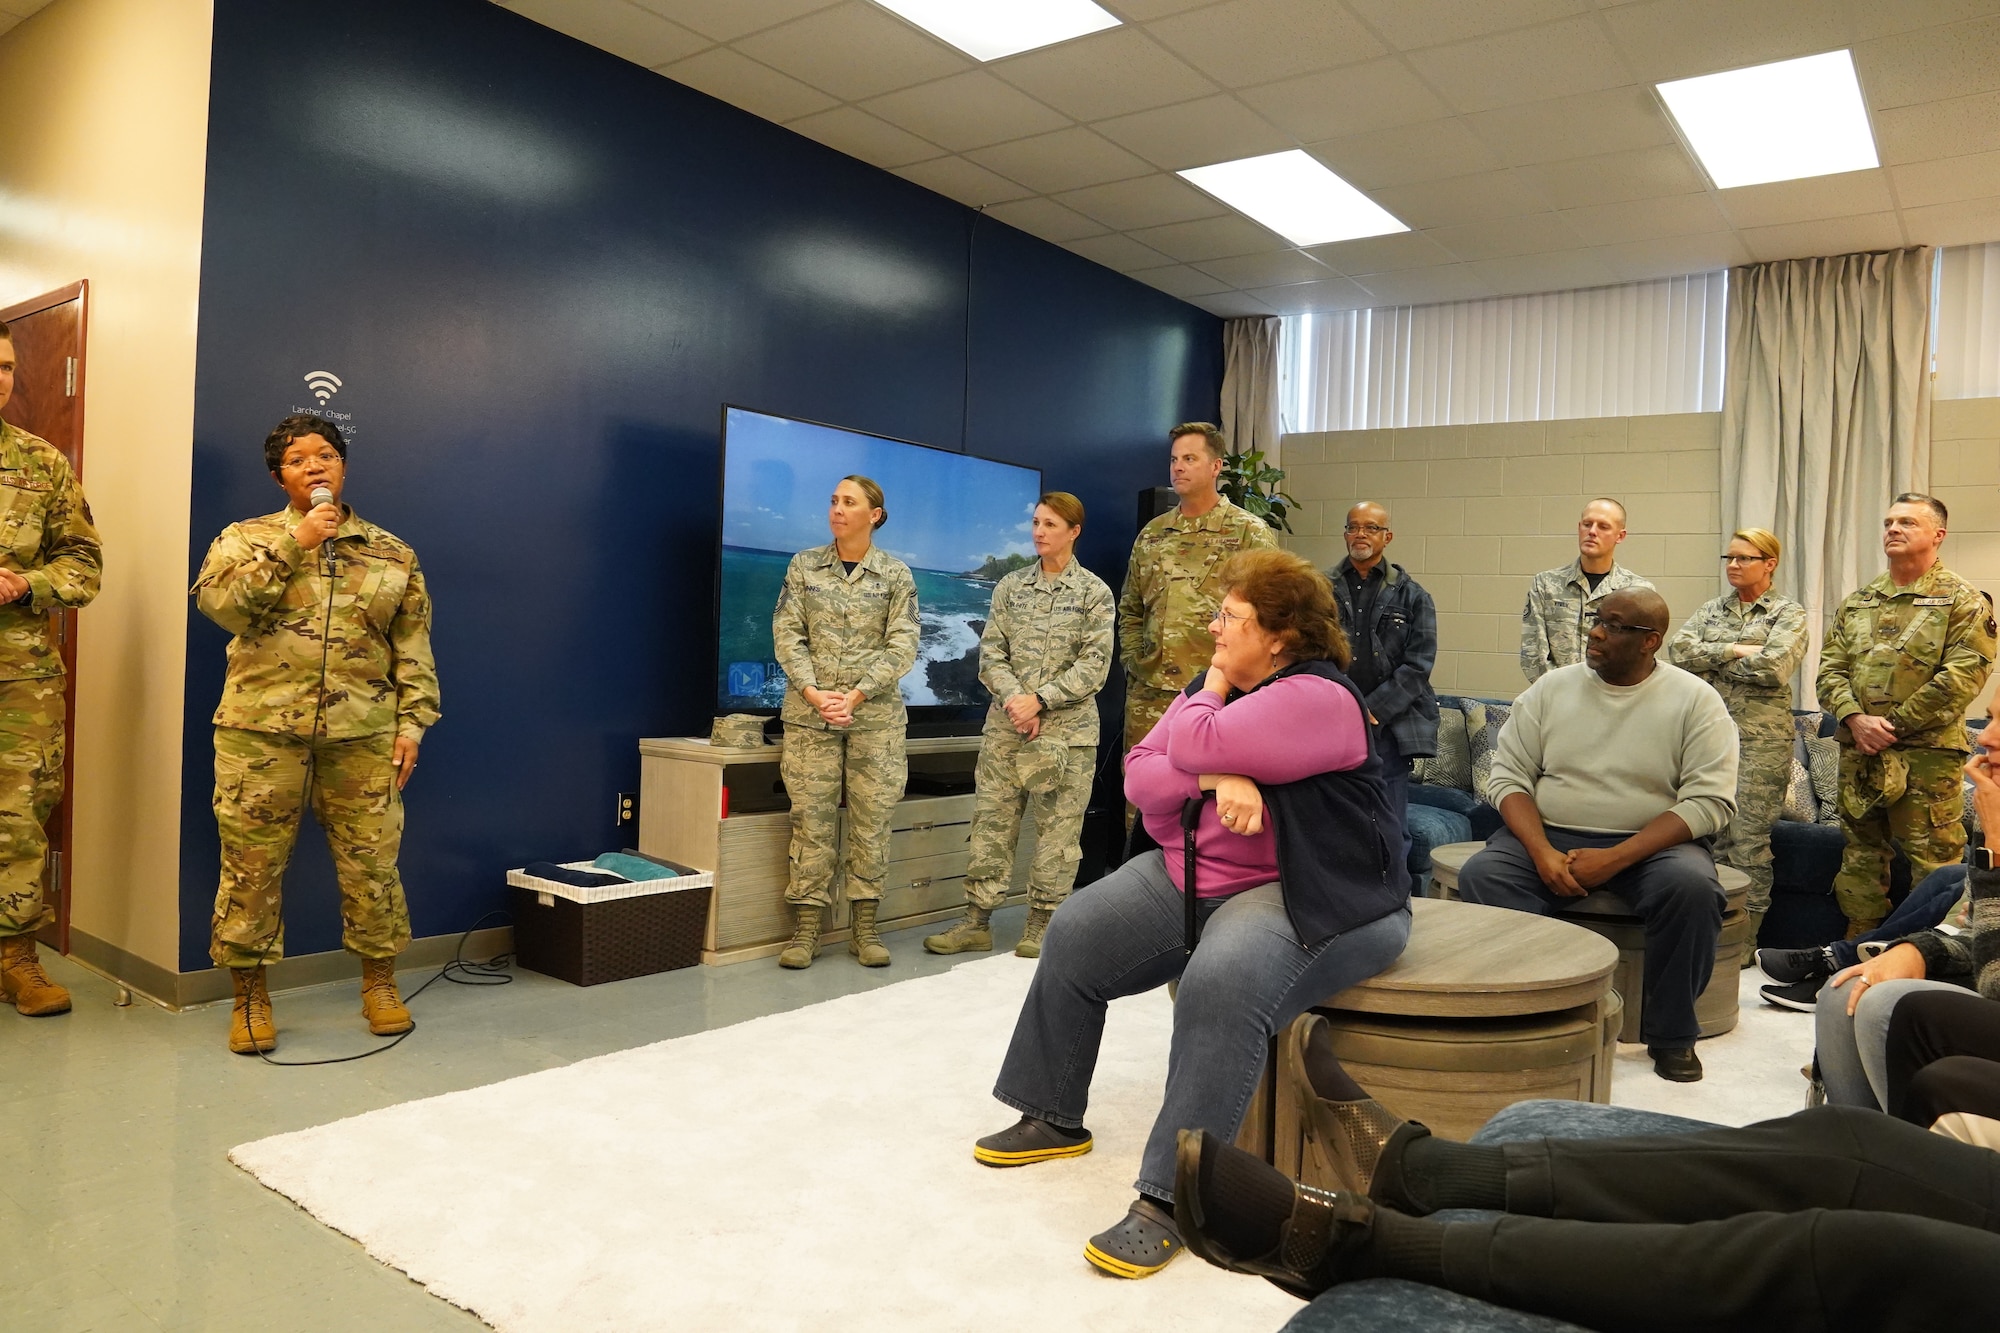 U.S Air Force Chaplain (Col.) Donnette Boyd, 81st Training Wing chaplain, gives remarks during the opening of The Lighthouse inside the Larcher Chapel at Keesler Air Force Base, Mississippi, Nov. 1, 2019. The Lighthouse is a place dedicated to permanent party Airmen complete with gaming stations, massage chairs, a kitchen, and a music room. The idea of the lighthouse stemmed from a meeting Col. Heather Blackwell, 81st Training Wing commander, had with some of Keesler's dorm residents in August. (U.S Air Force photo by Airman 1st Class Spencer Tobler)